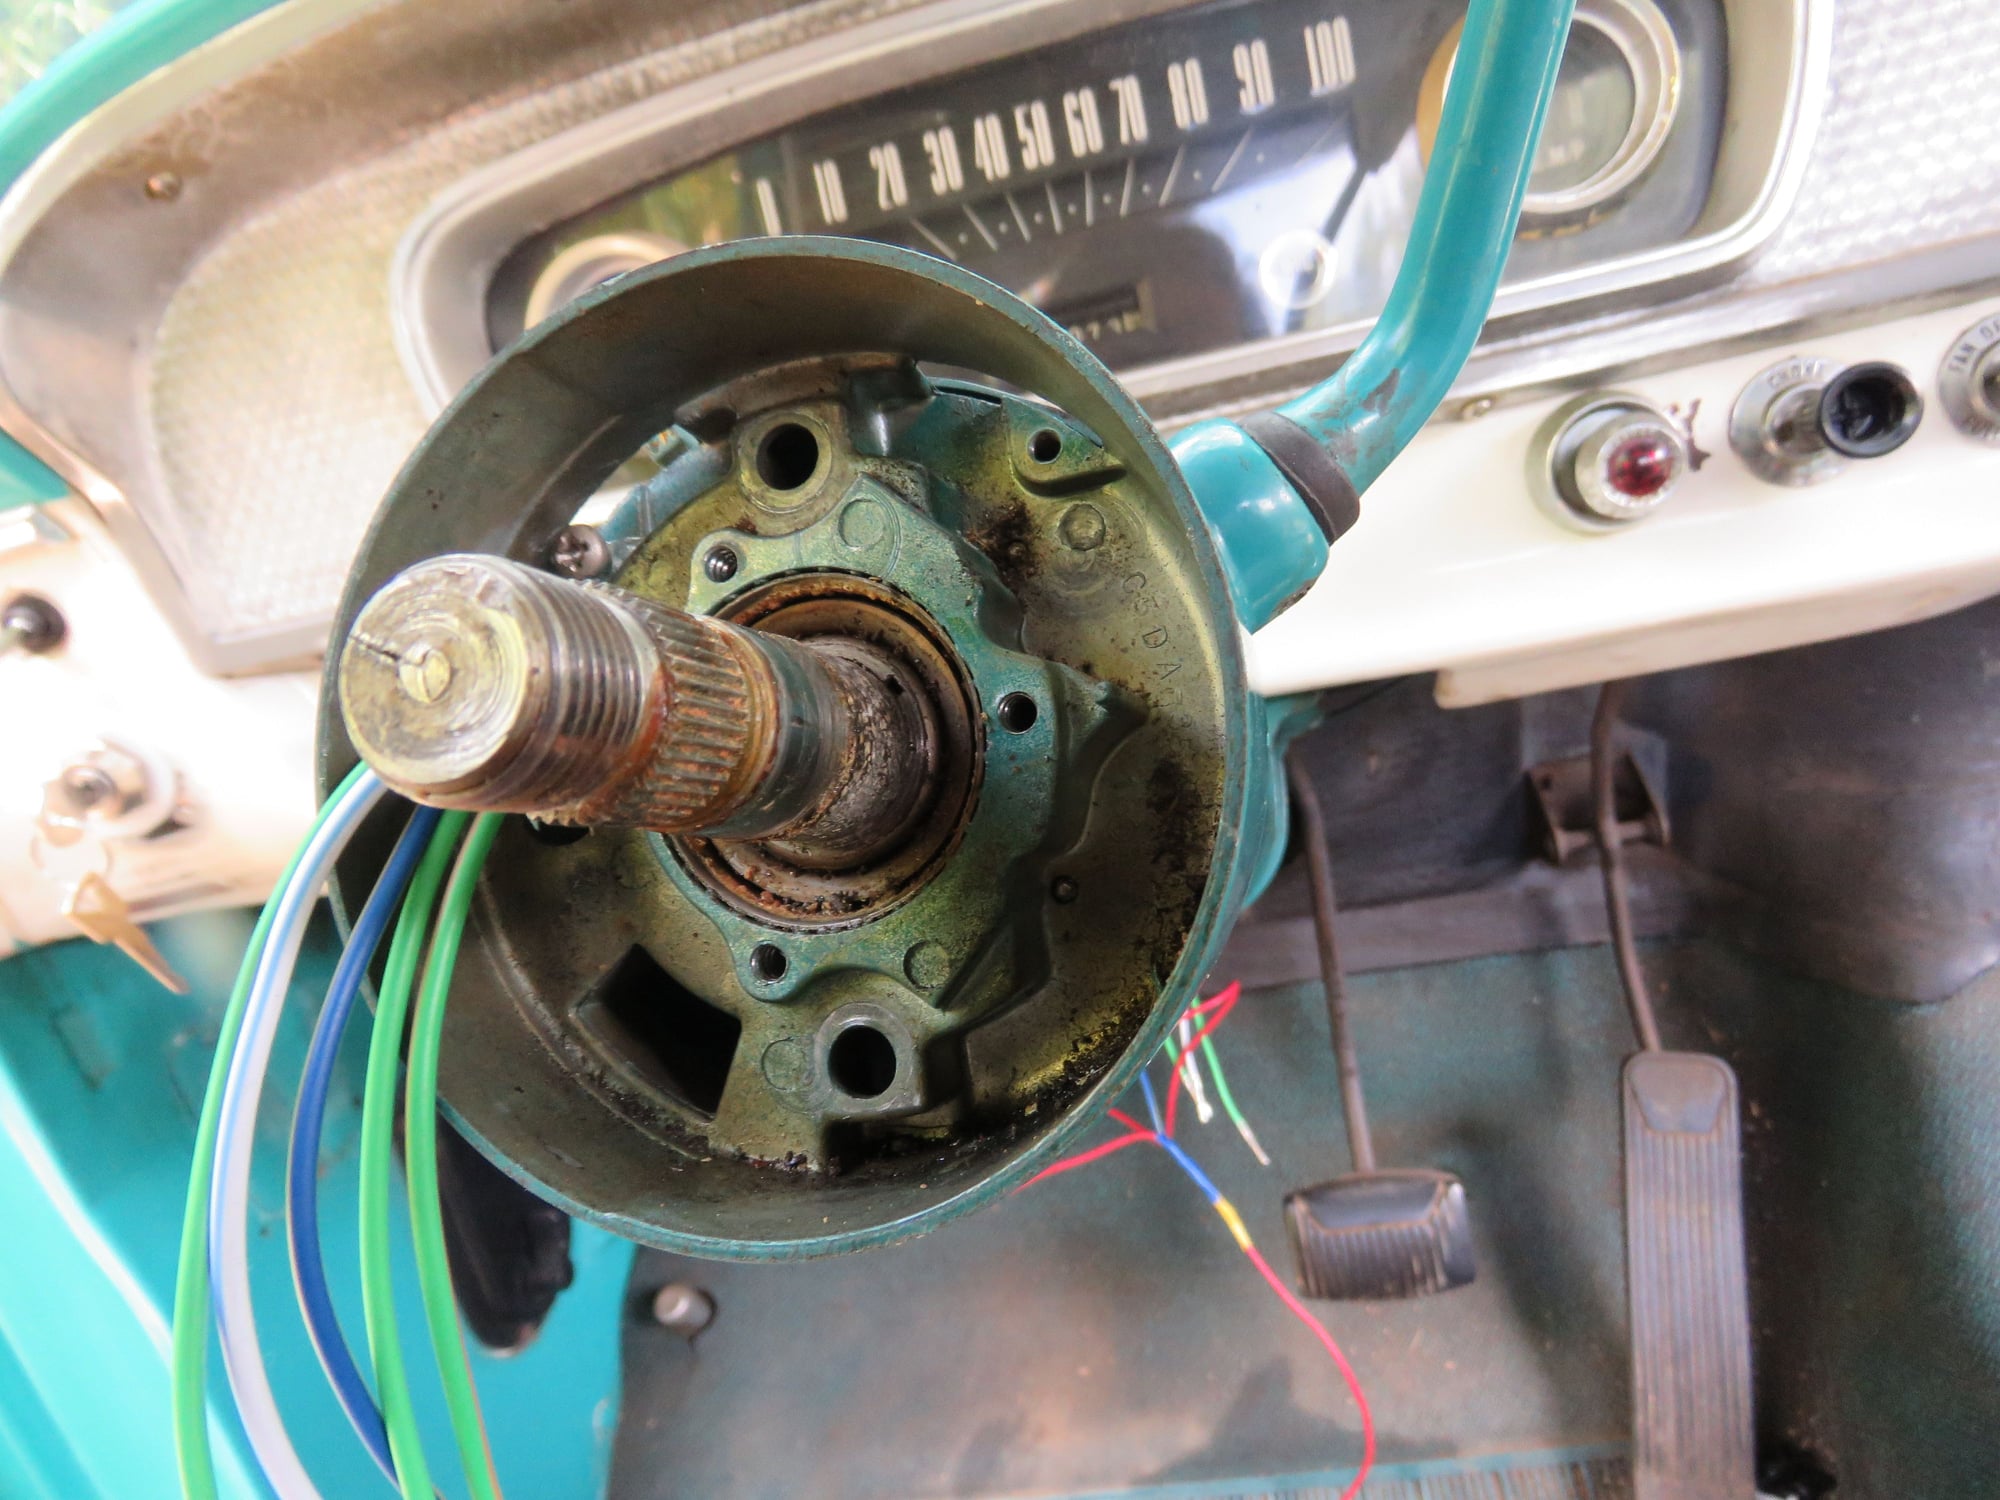 Wiring a turn signal switch - Page 3 - Ford Truck Enthusiasts Forums